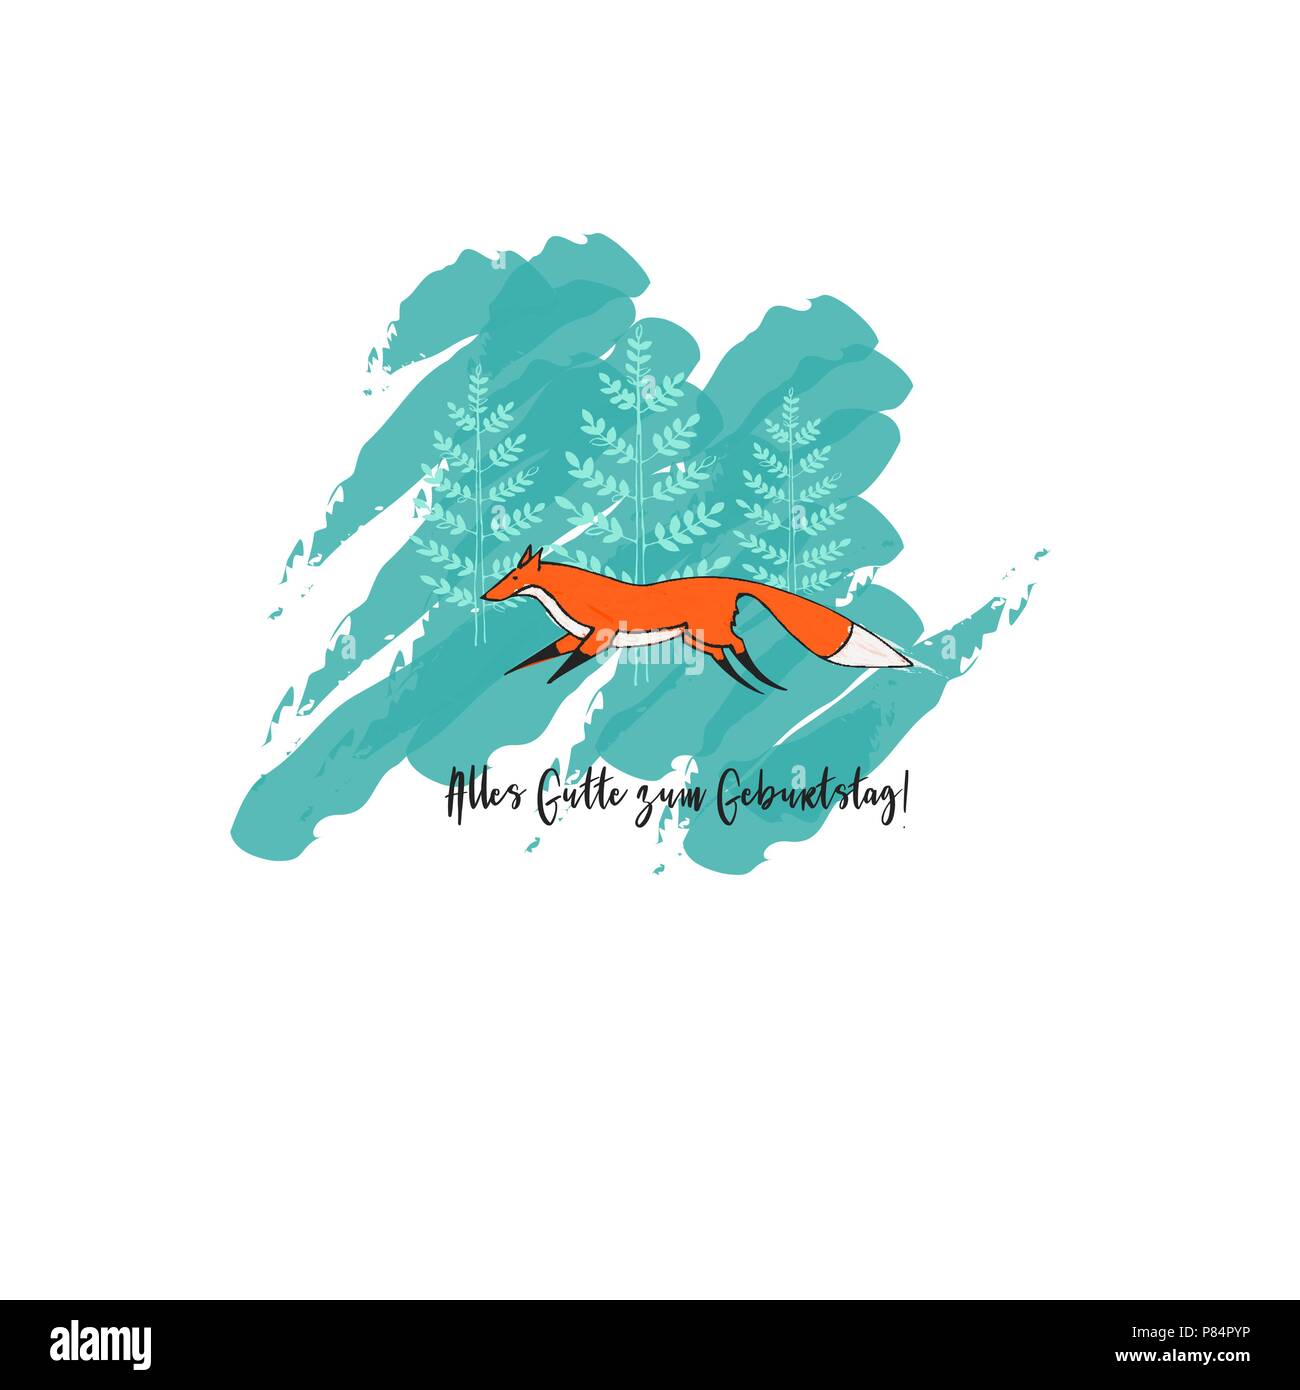 The Greeting Card with Cute Running Fox and Trees on Background. Text: Alles Gutte zum Geburtstag in English Happy Birthday. Stock Vector